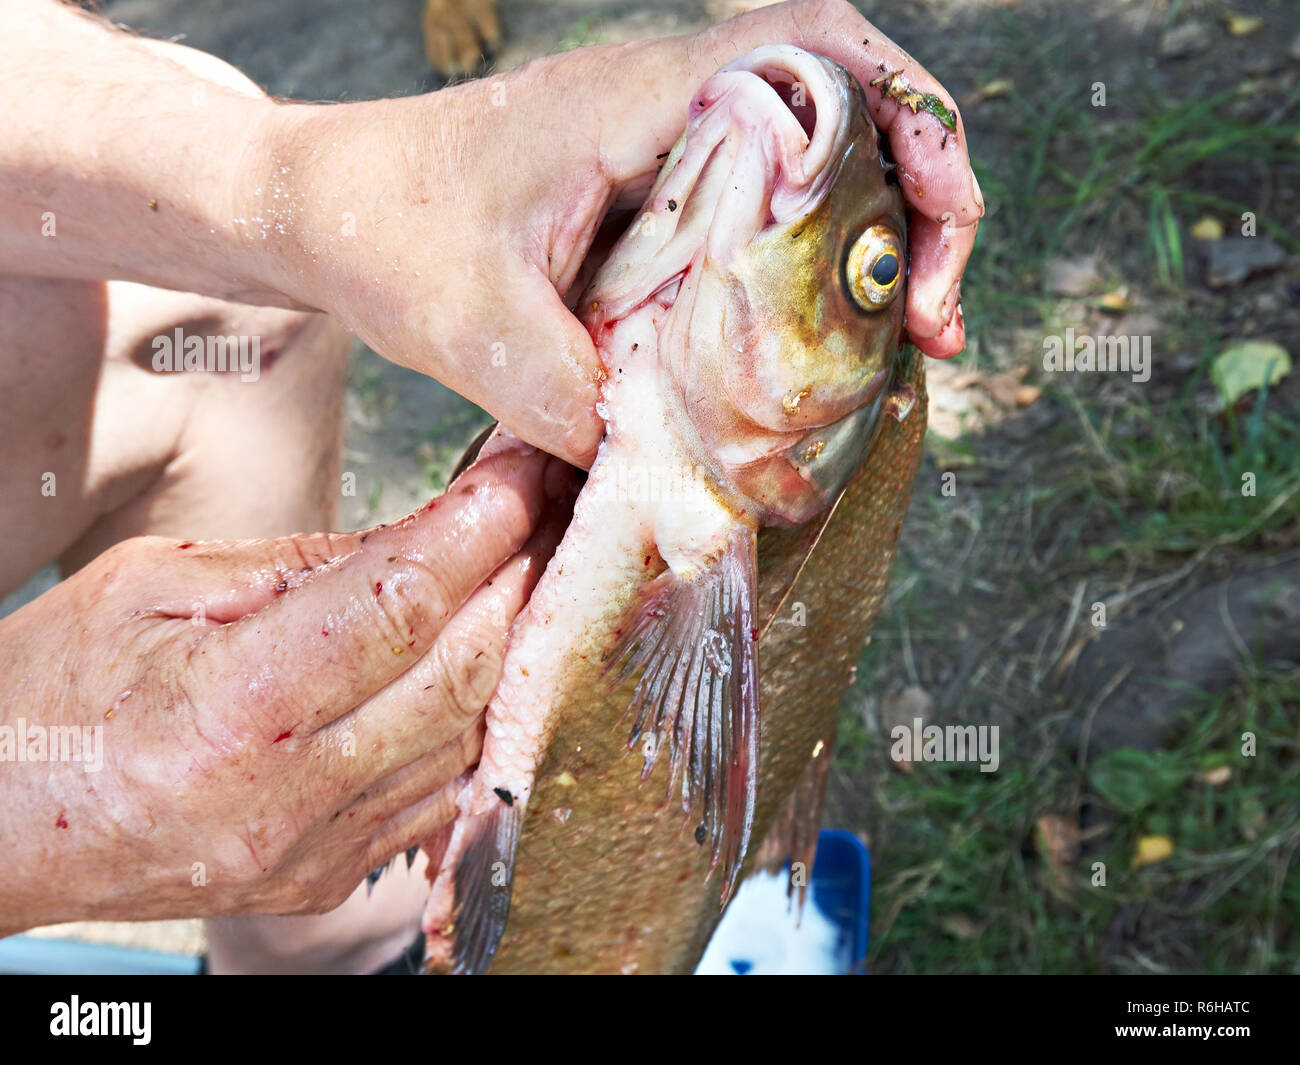 Preparing bream fish for cooking. Removal of the viscera of fish Stock Photo